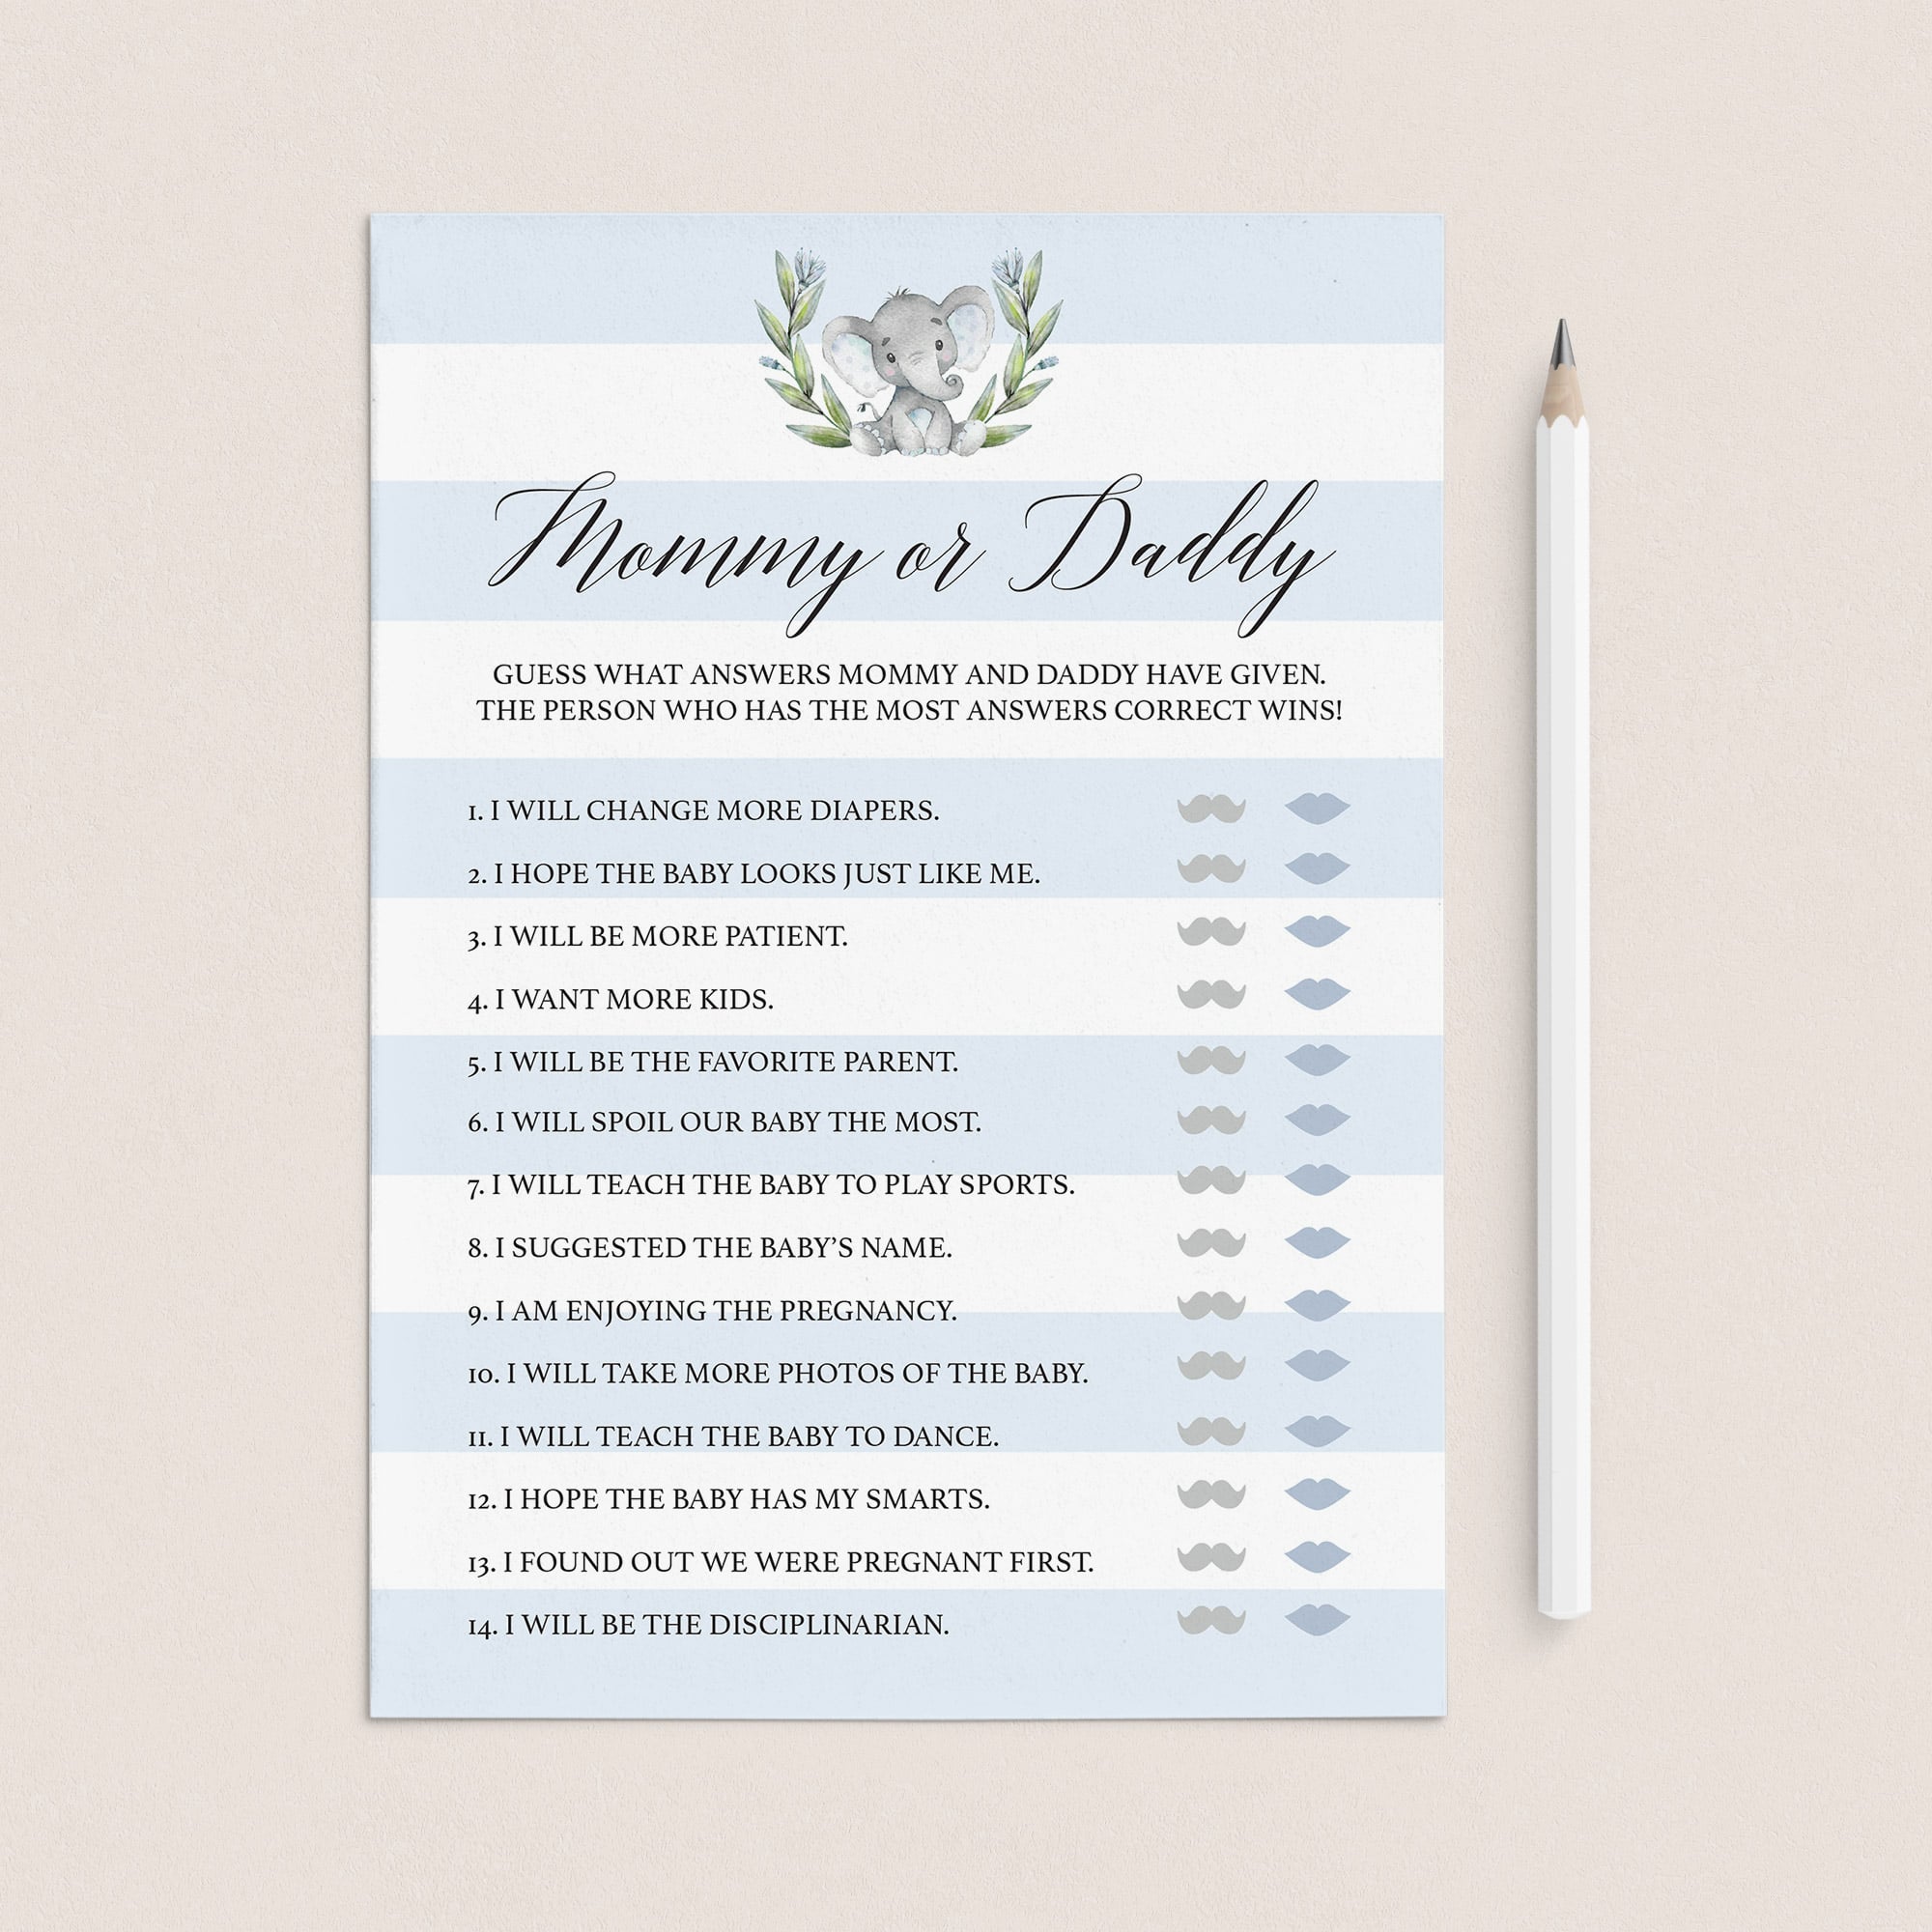 Mommy or daddy quiz for boy baby party by LittleSizzle